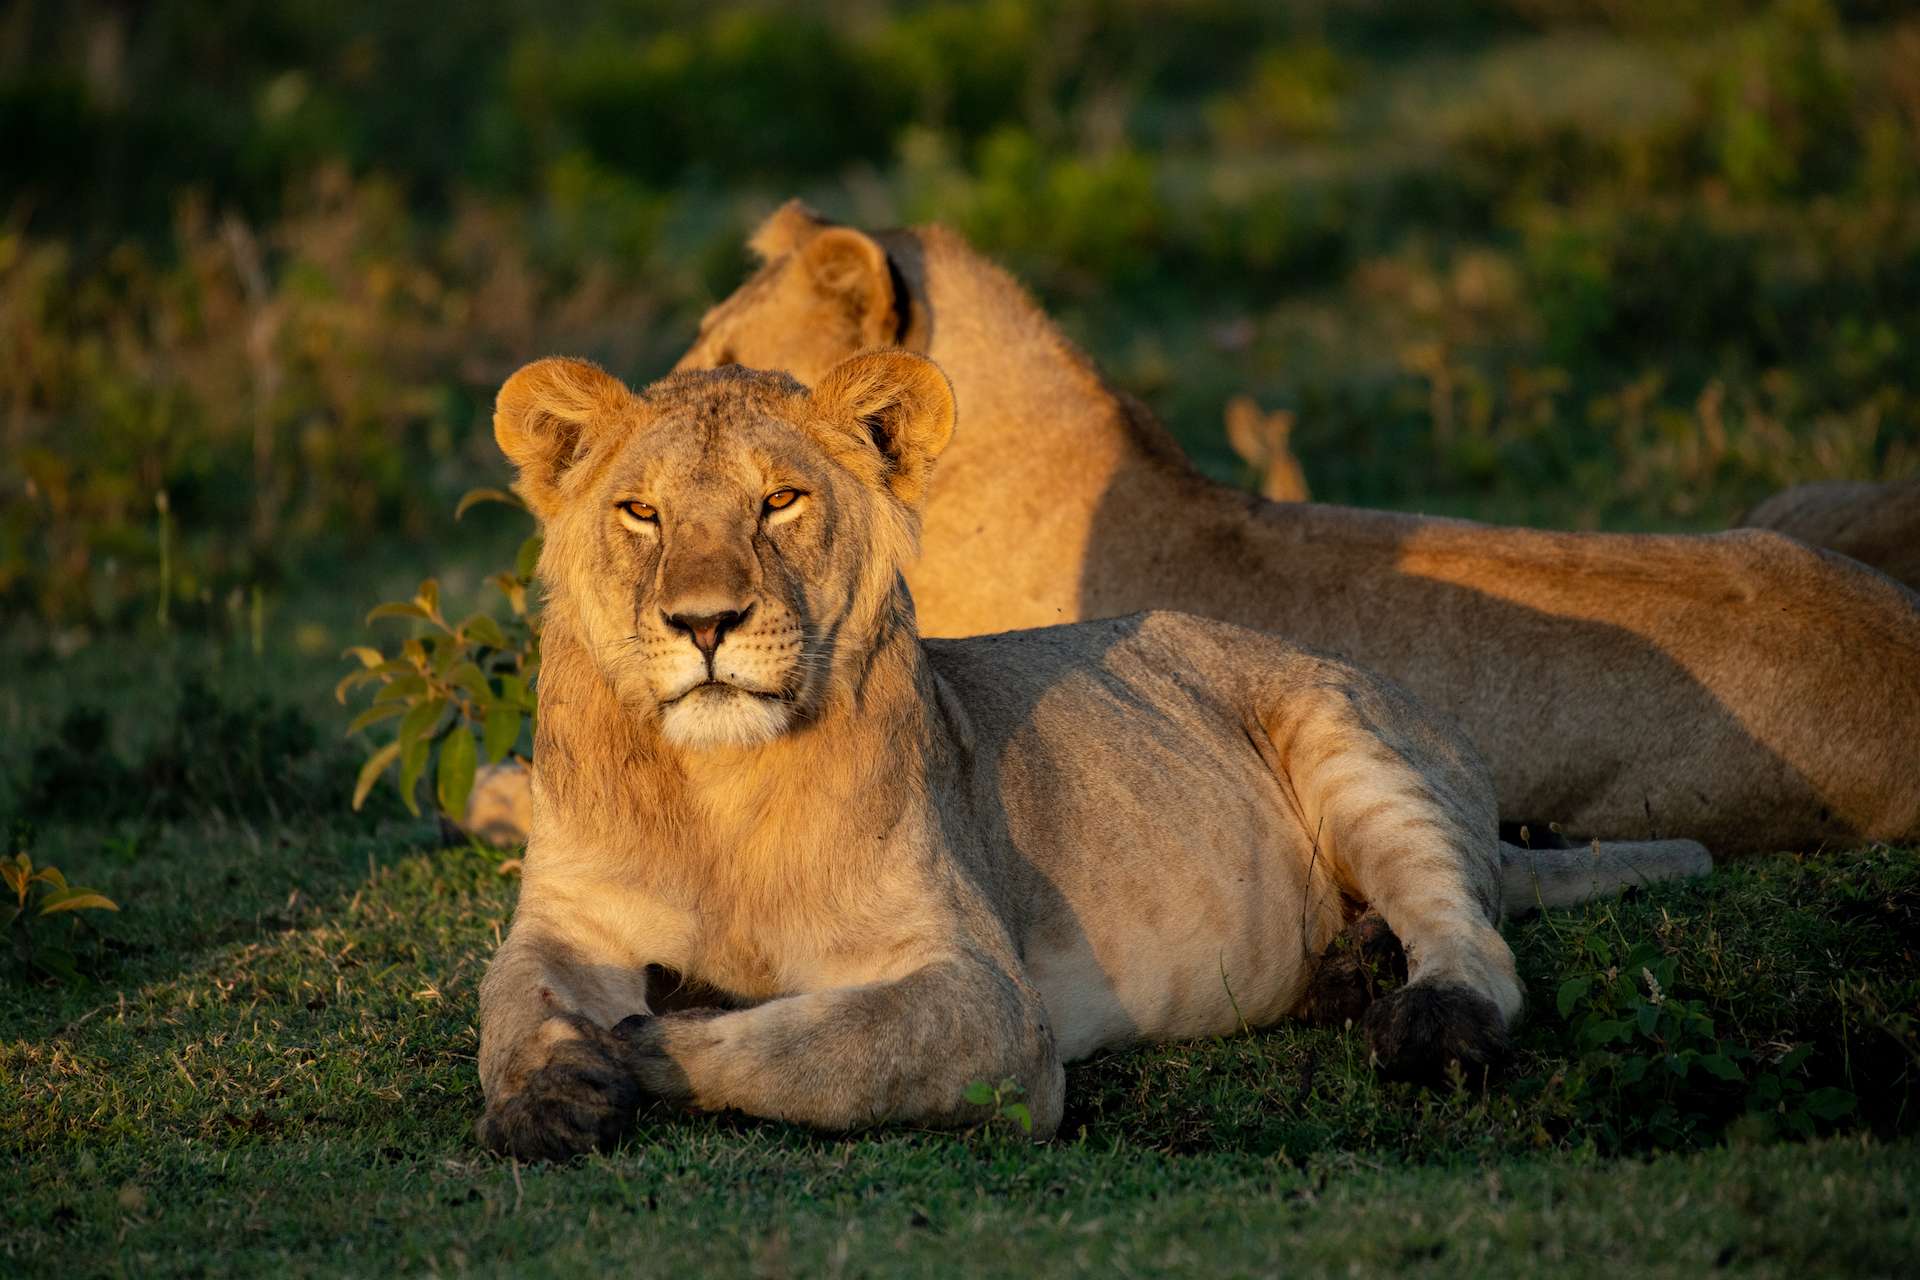 A lioness sitting on grass in Tanzania. 